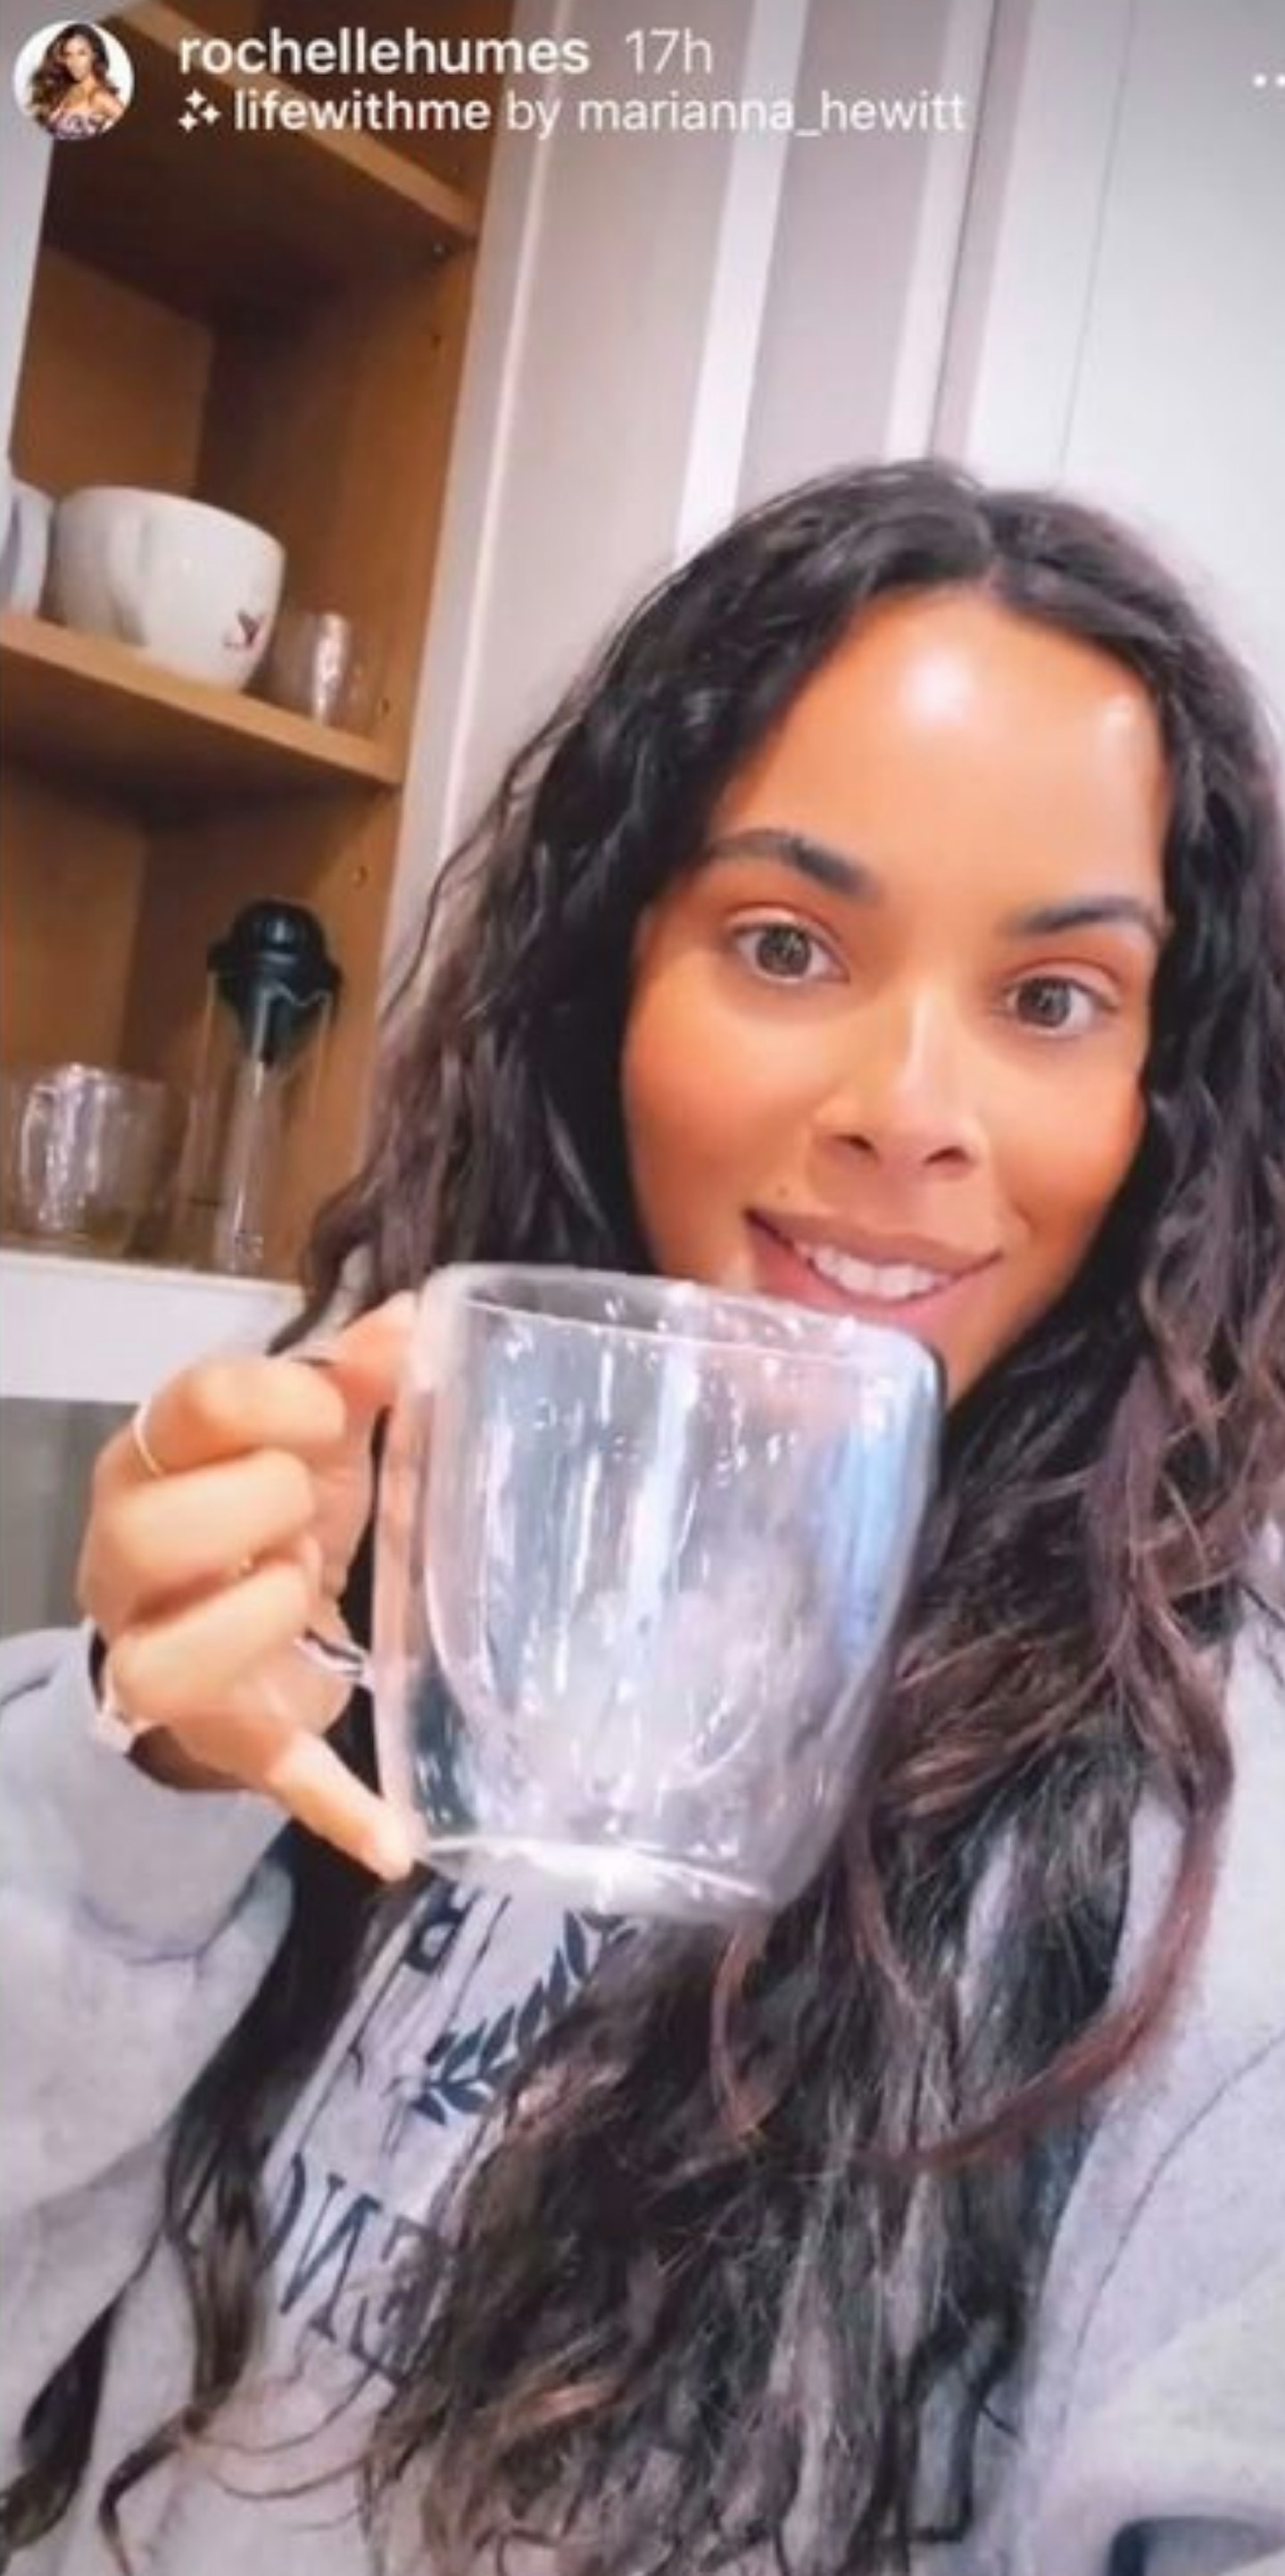 rochelle humes thermo drinking cups